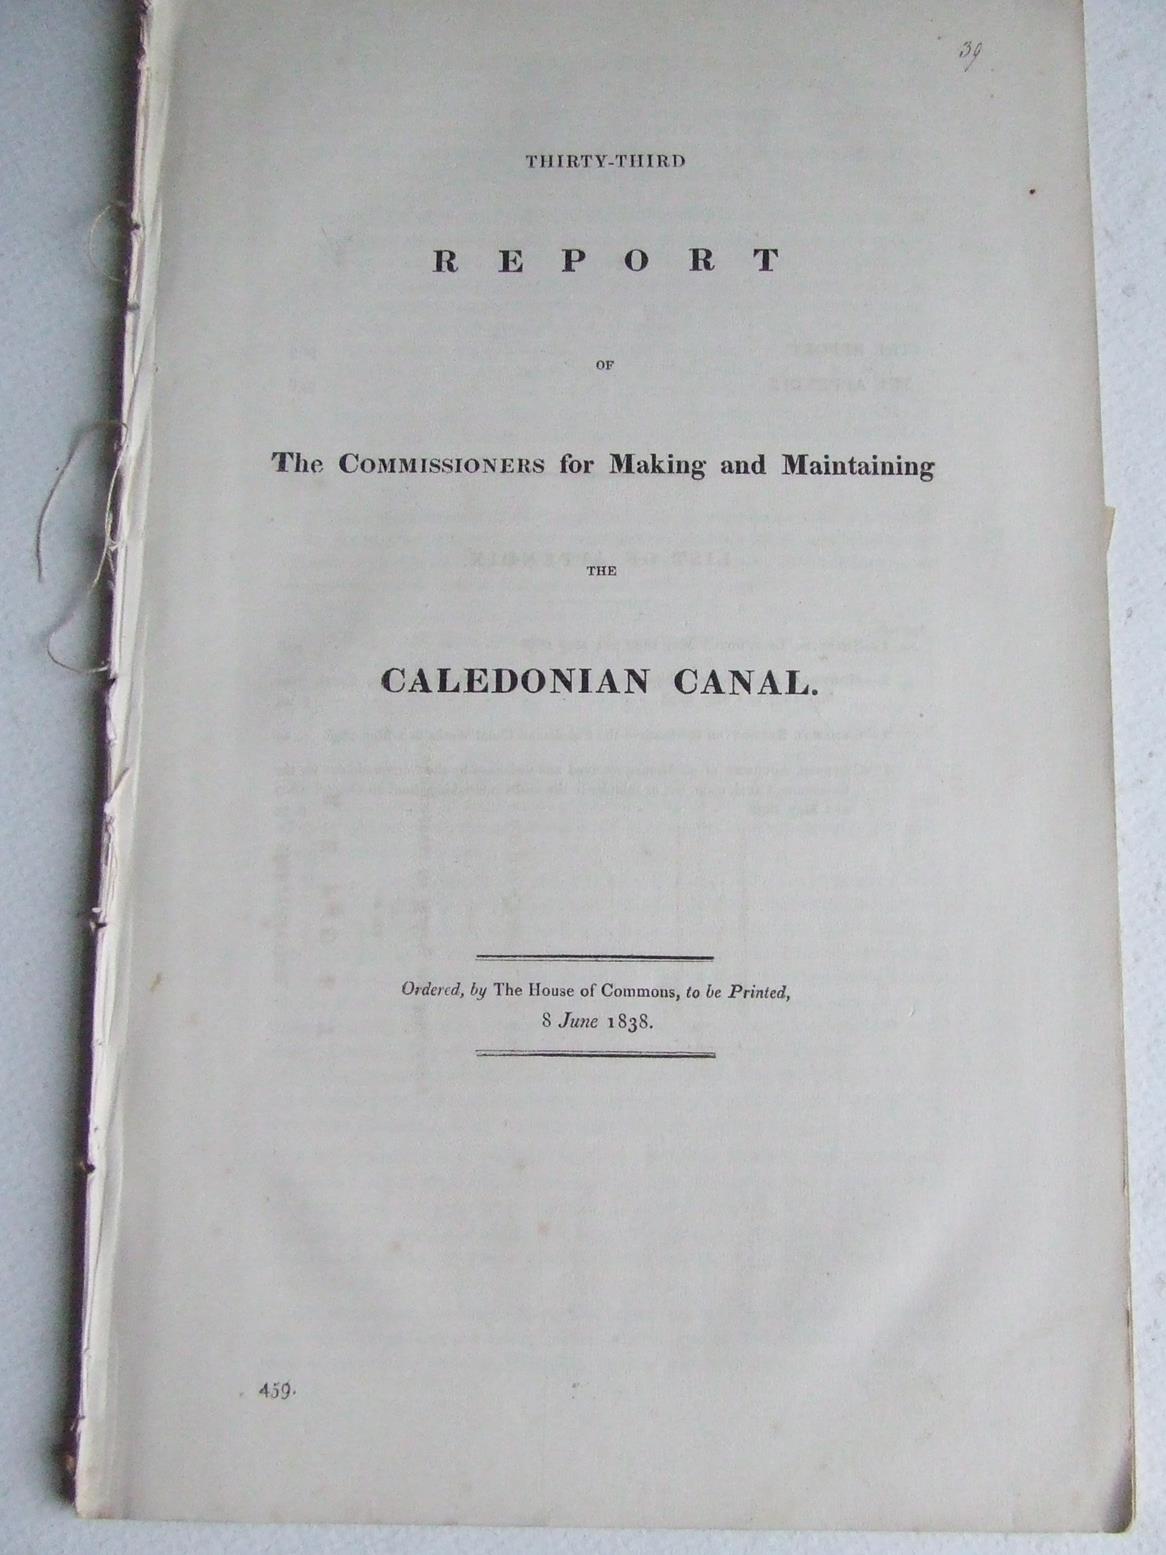 THIRTY-THIRD REPORT OF THE COMMISSIONERS FOR MAKING AND MAINTAINING THE CALEDONIAN CANAL